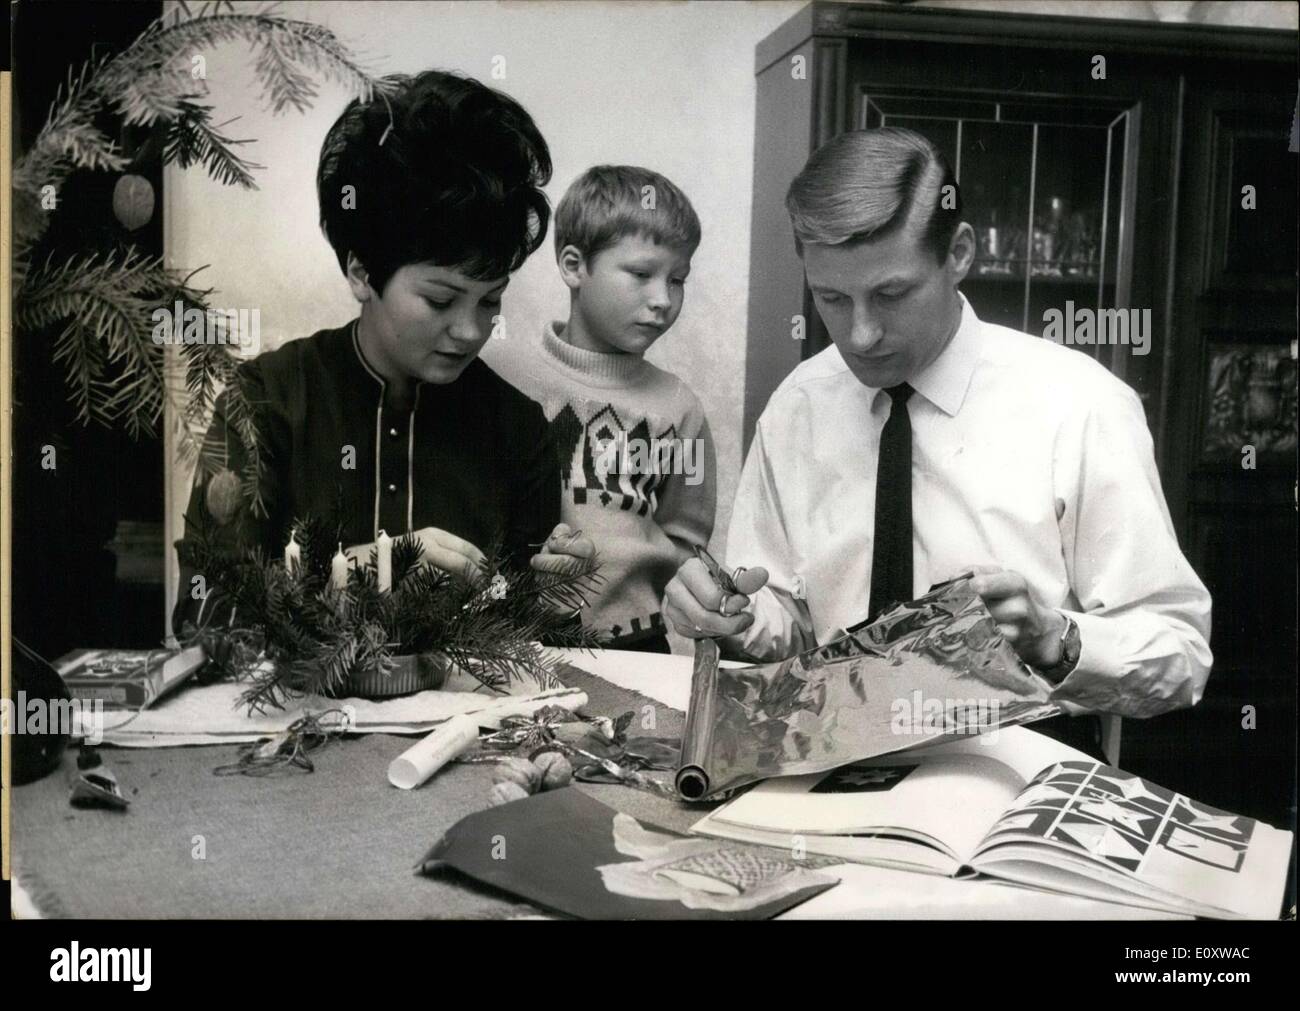 Nov. 29, 1967 - Friedel Lutz is pictured here with his family, wife Helga and son Peter, doing Christmas decorations. Lutz played for ''Eintracht Frankfurt'' and guested for ''Munich 1860.'' He will play his 400th game for Frankfurt against this very team. Stock Photo